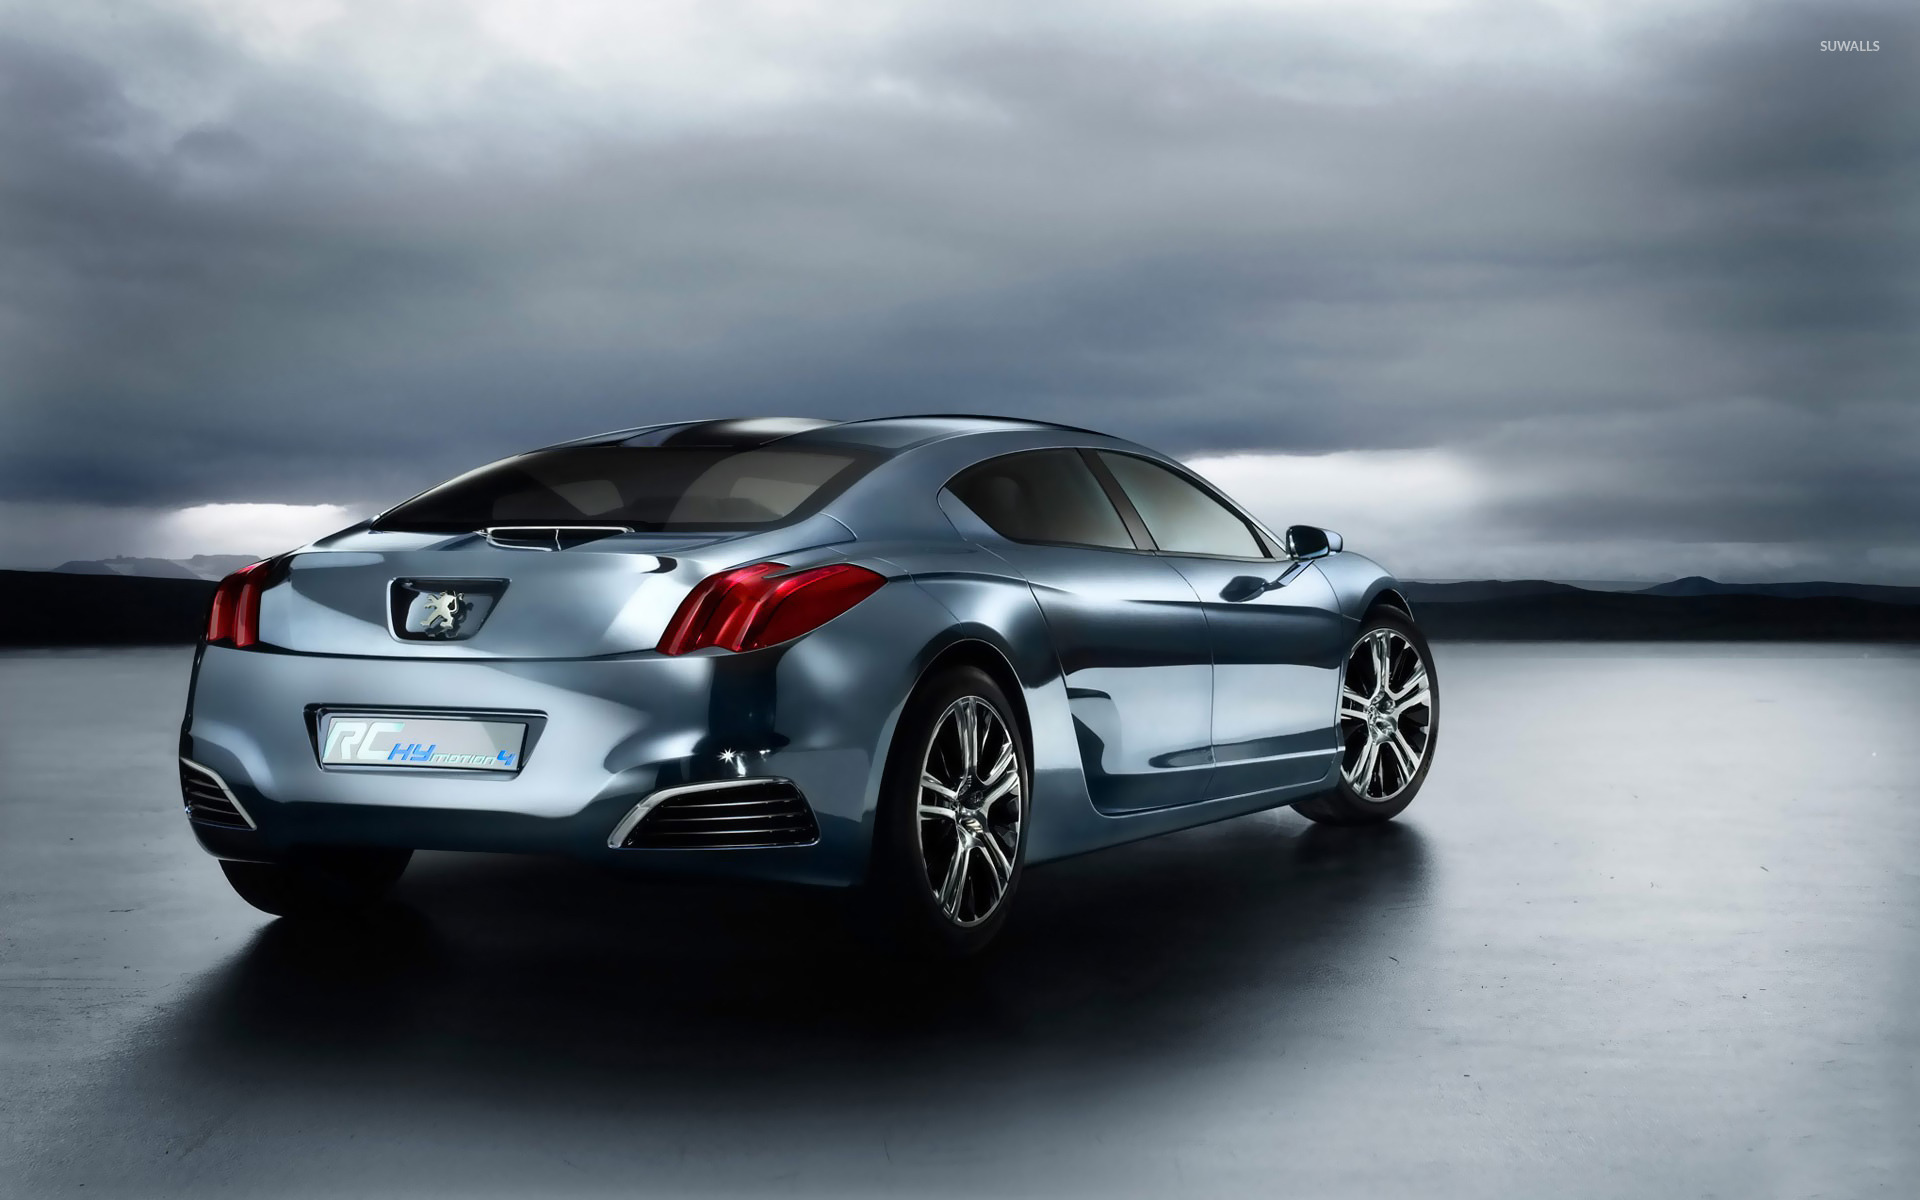 Peugeot Rc Hymotion 4 - HD Wallpaper 